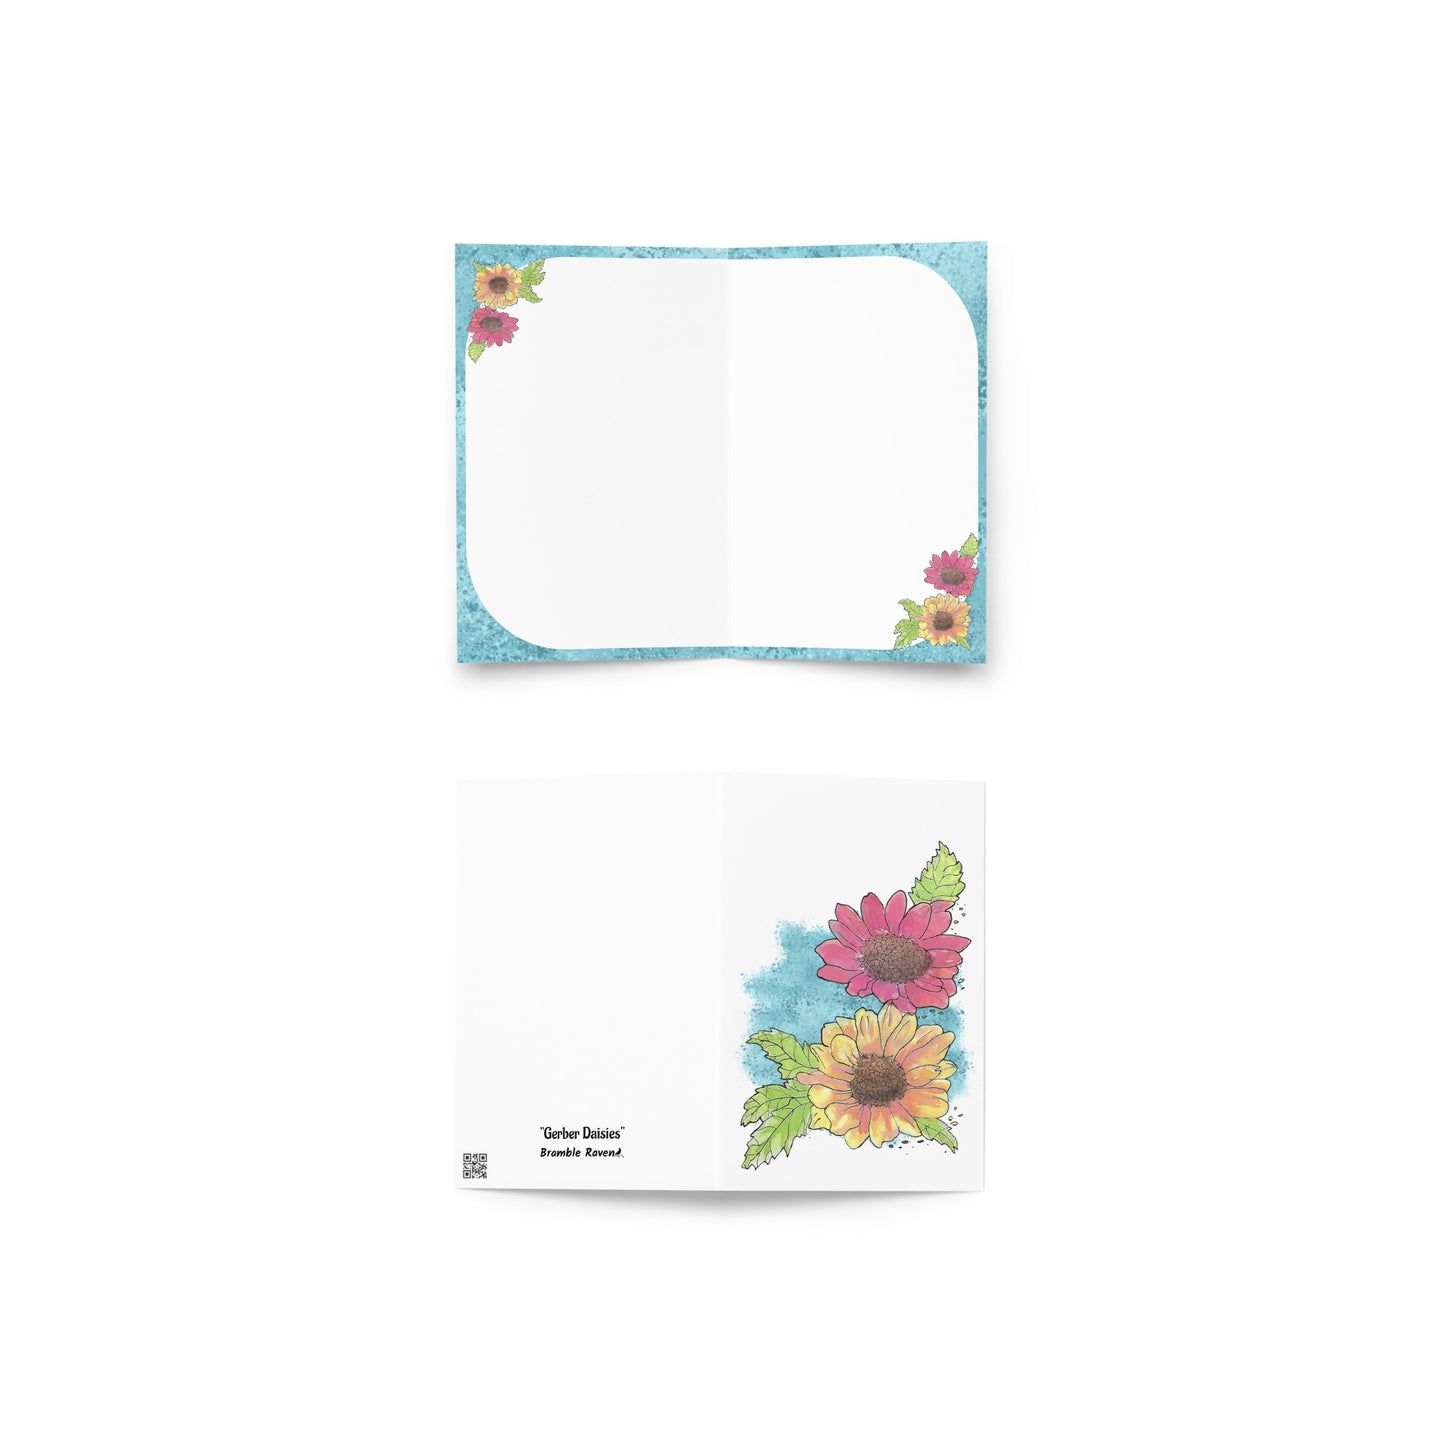 4 by 6 inch watercolor Gerber daisies greeting card and envelope. Has watercolor daisies on the front. The inside has a blue watercolor border with daisy accents and room for a message. Image shows front, back and inside of card.